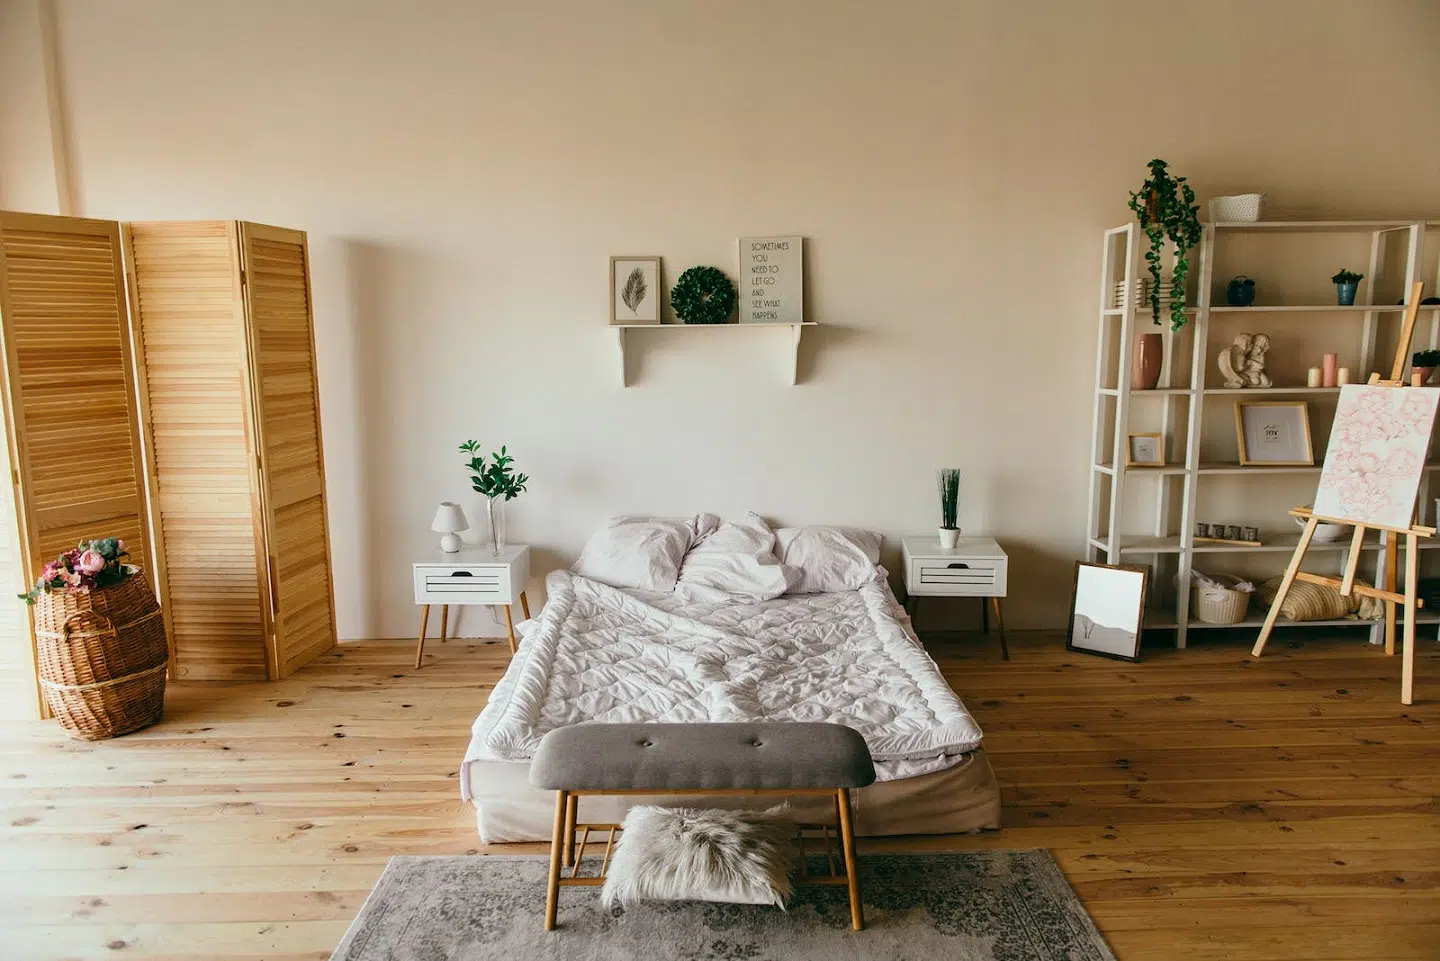 The Anatomy of the Modern Bedroom